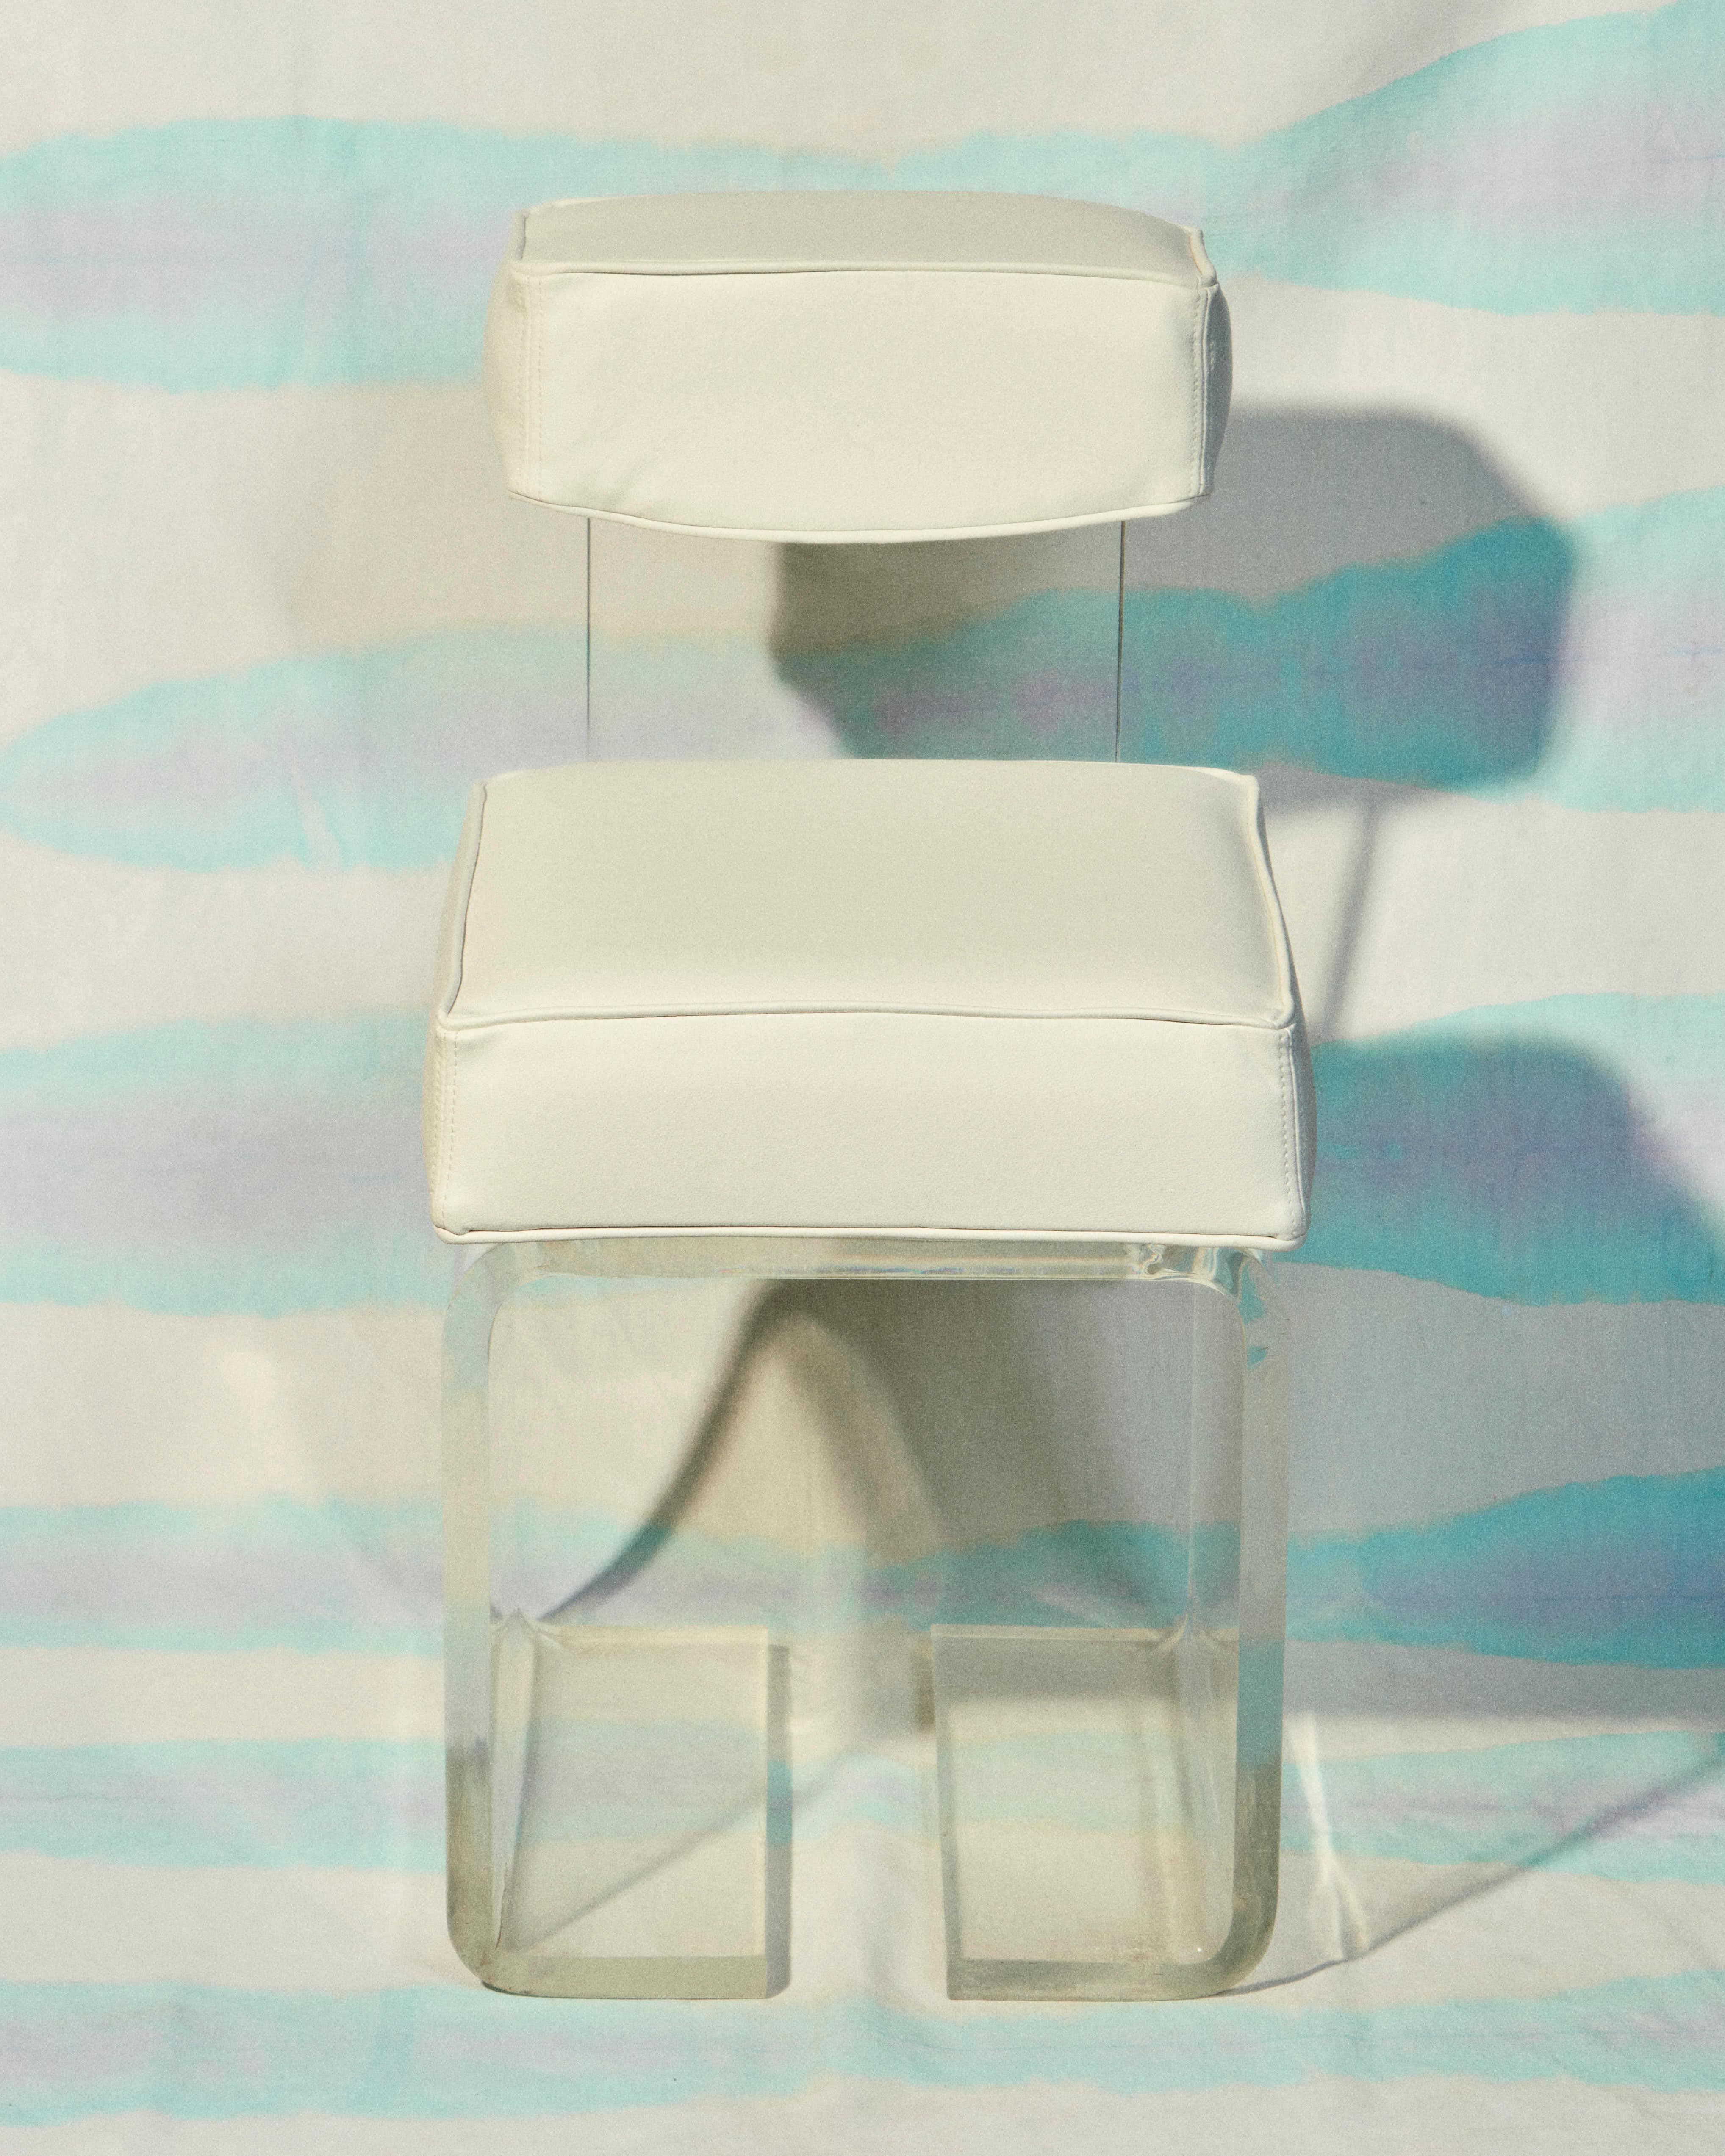 Rare chair by André Courrèges in plexiglass with white leather cover
France, circa 1970